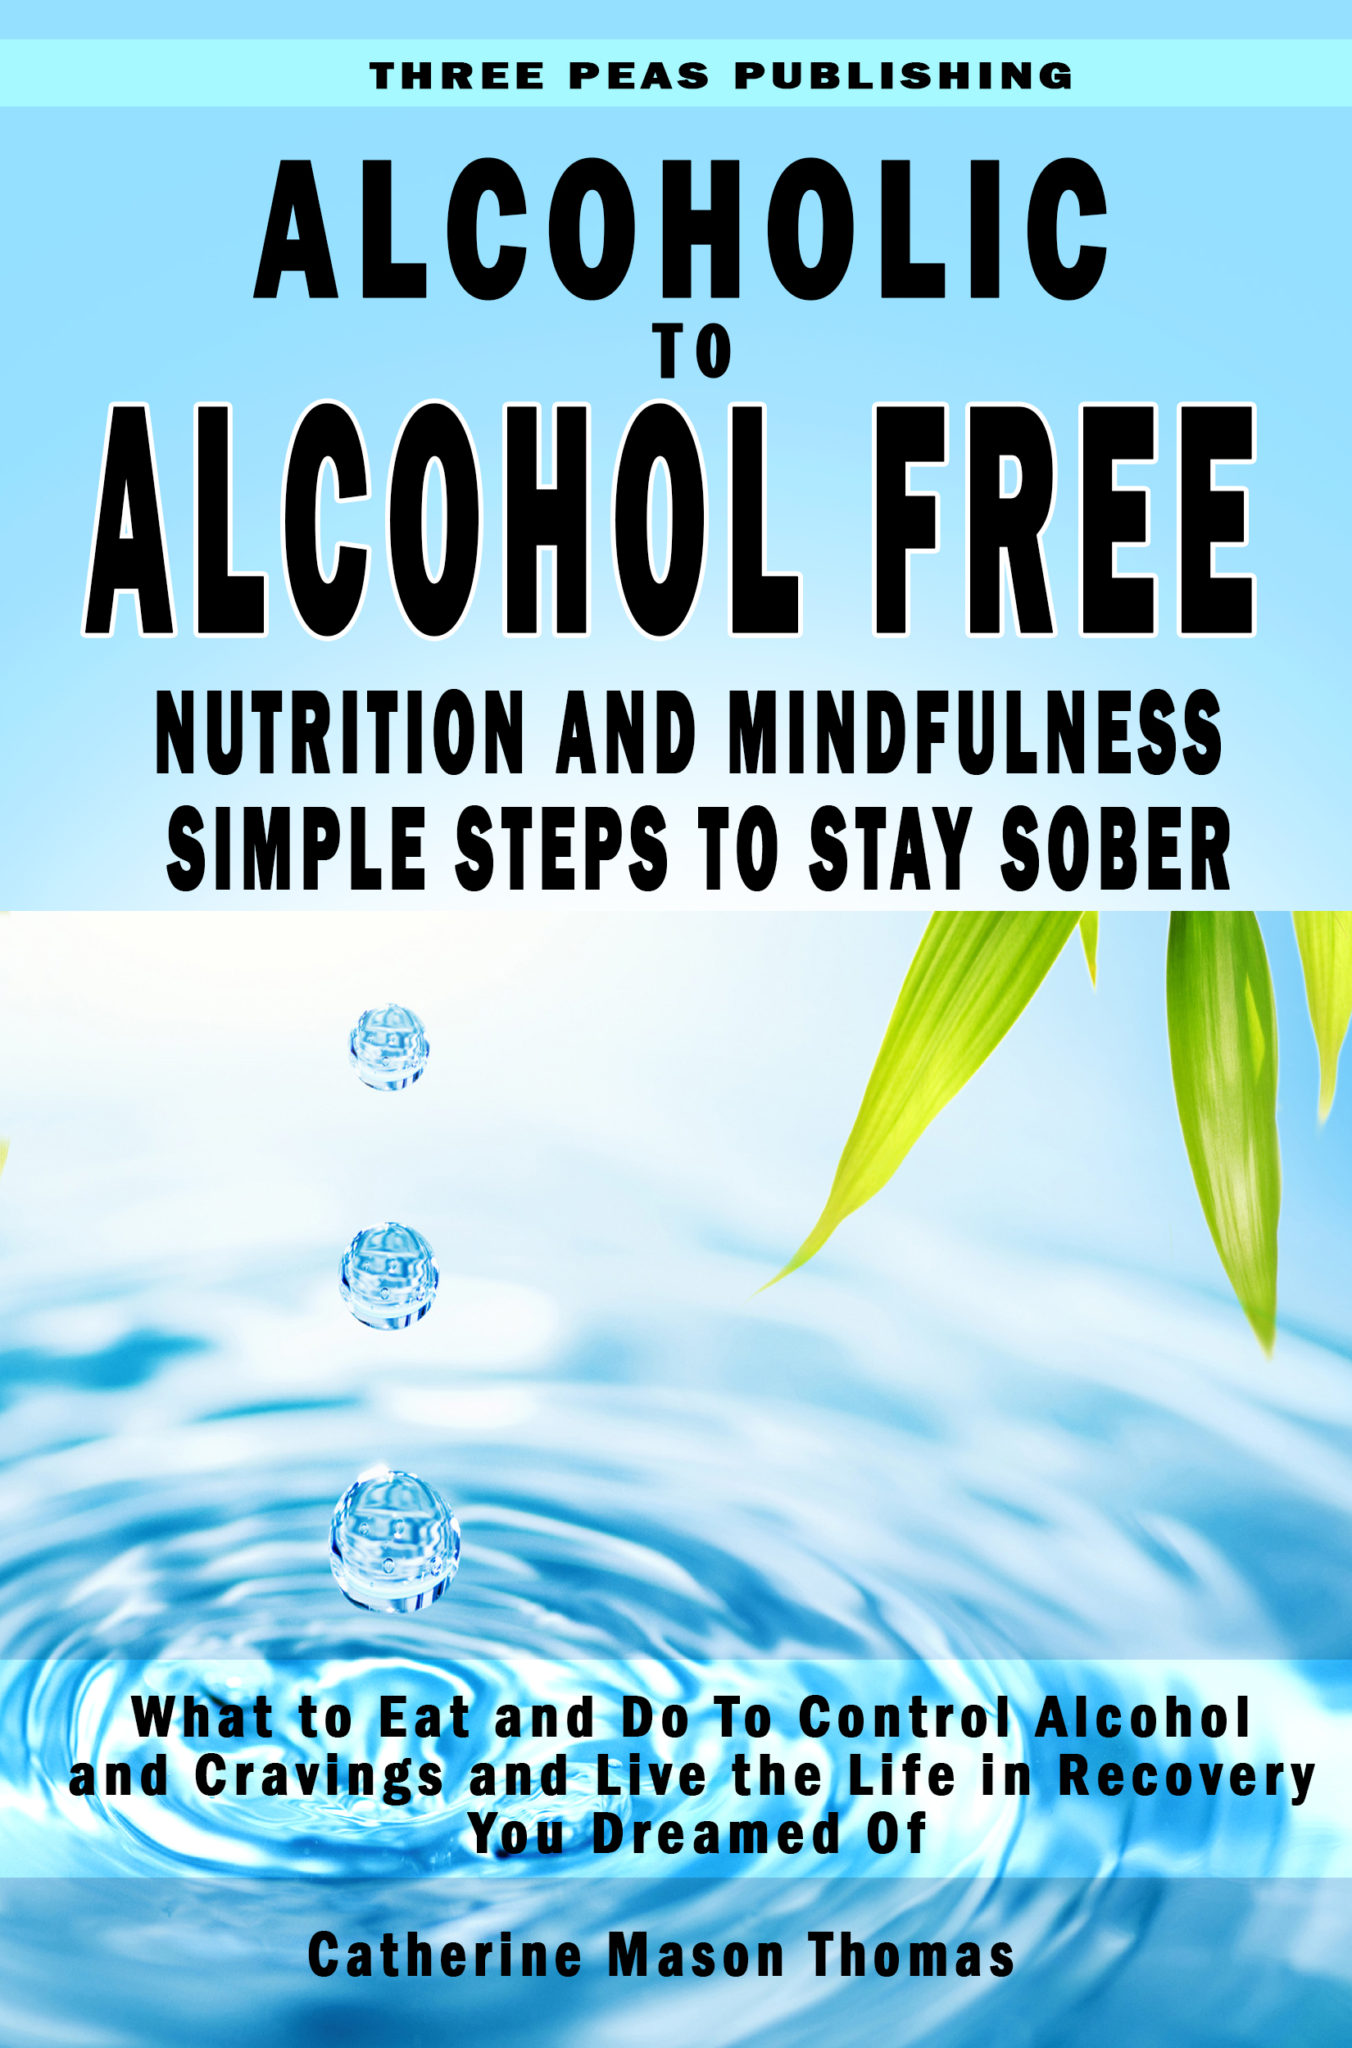 FREE: Alcohol to Alcohol Free. Nutrition and Mindfulness Simple Steps to Stay Sober by Catherine Mason Thomas